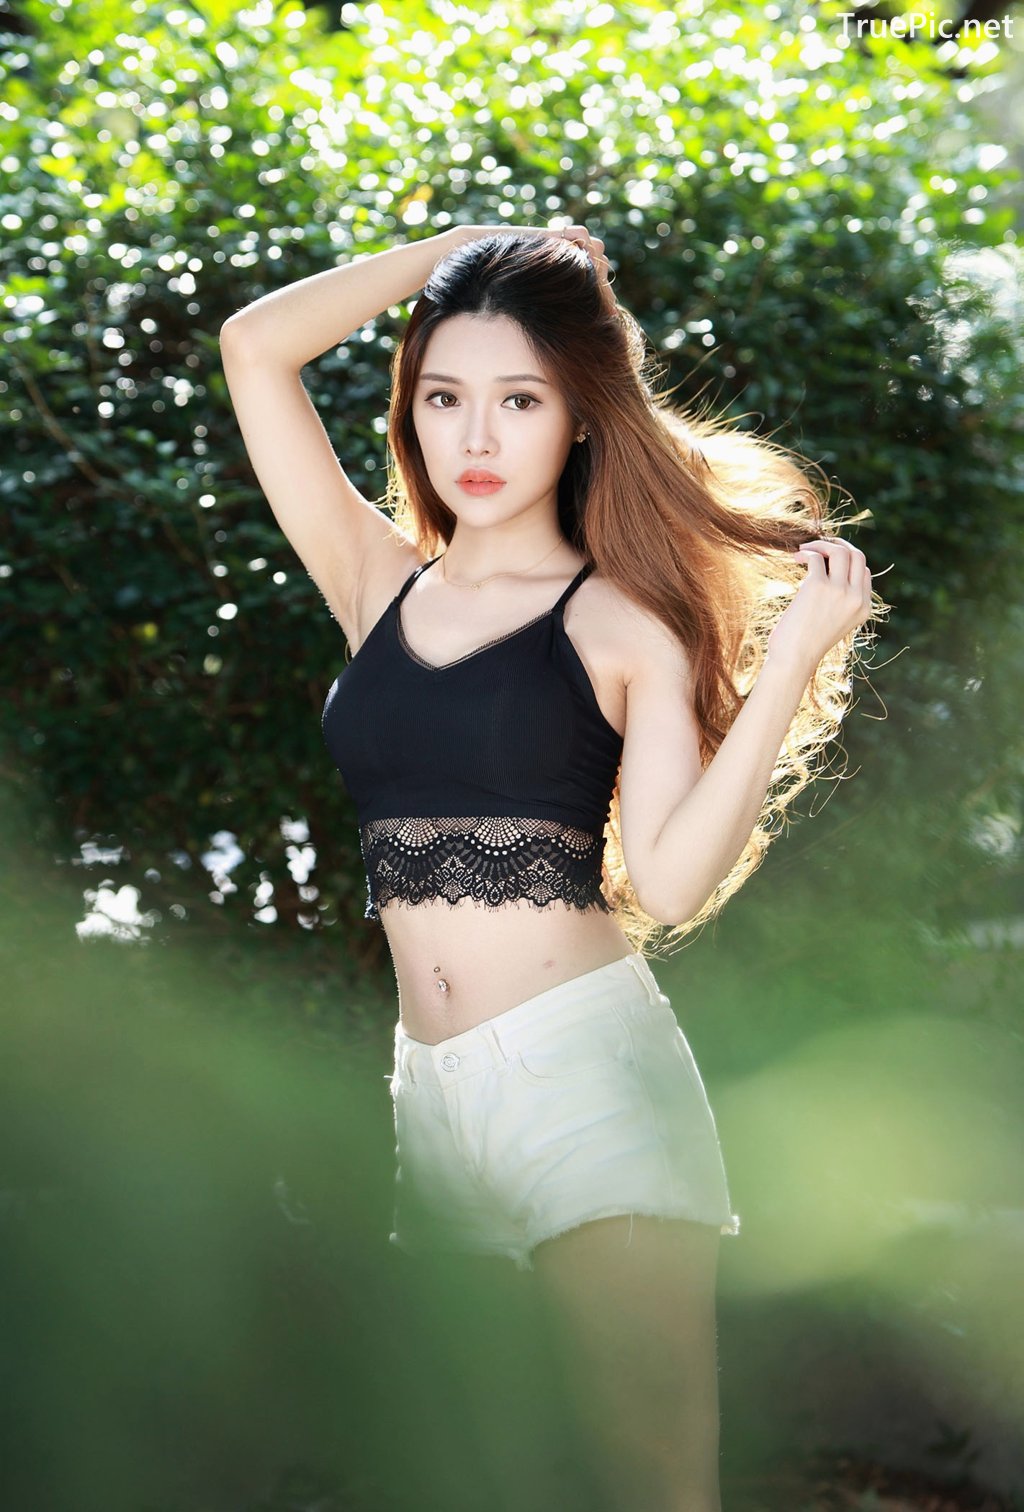 Image-Taiwanese-Model–莊舒潔–Hot-White-Short-Pants-and-Black-Crop-Top-TruePic.net- Picture-37